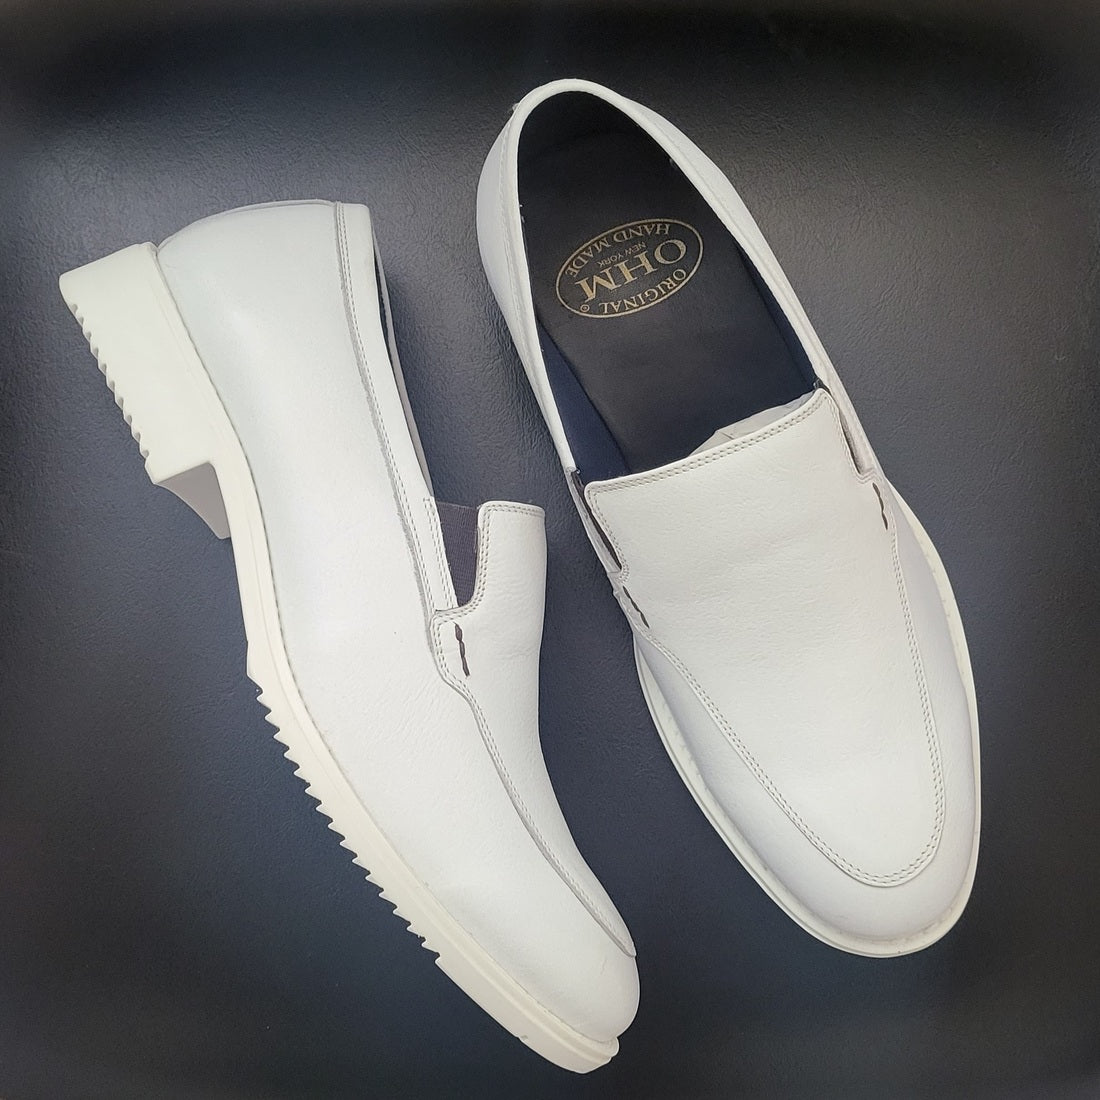 OHM New York Golf Infinity Slip-on Leather Shoes